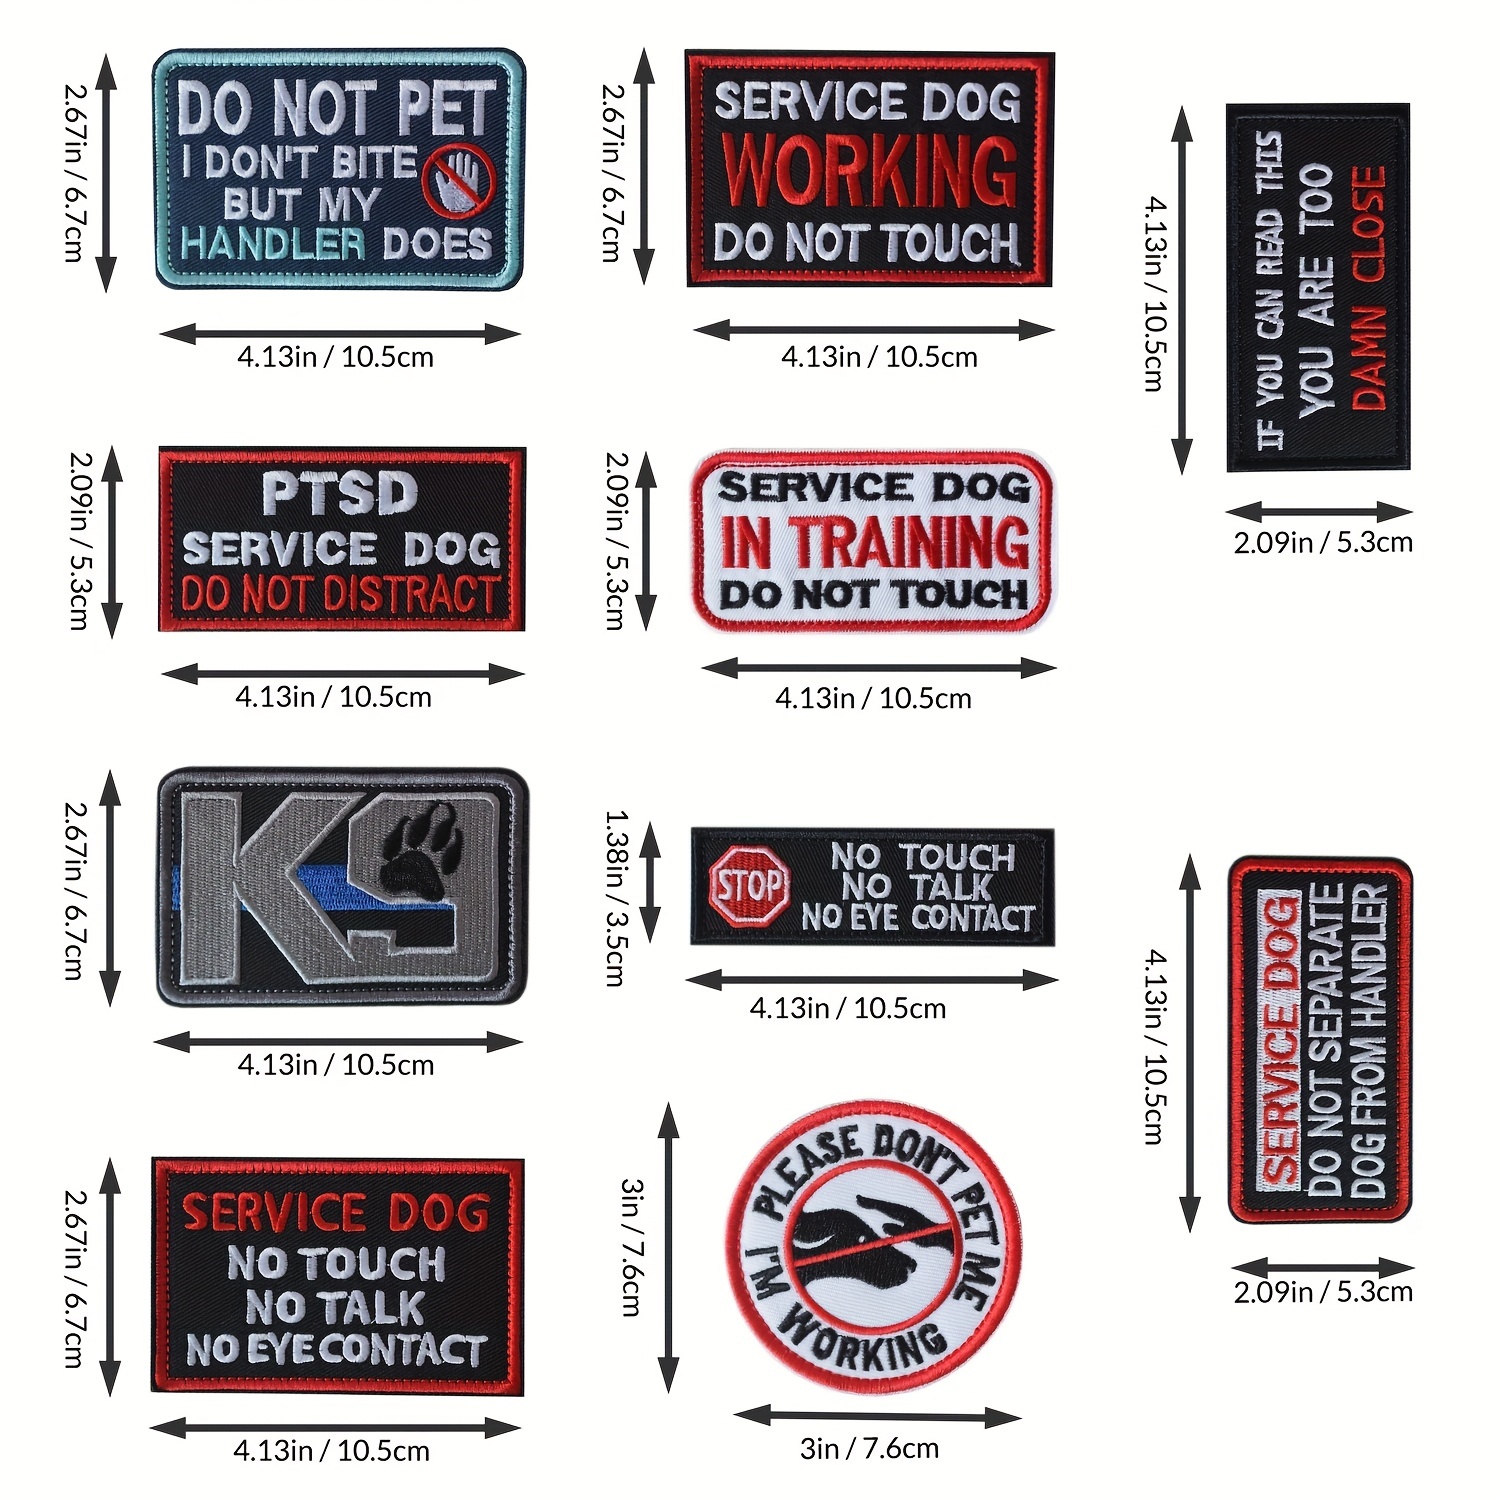 HAPINARY 4pcs Service Dog Do Not Pet Patch Dog Eye Patch No Touch Dog Patch  Bite Sleeve Dog Training Large Dogs Do Not Pet Collar Do Not Touch Patches